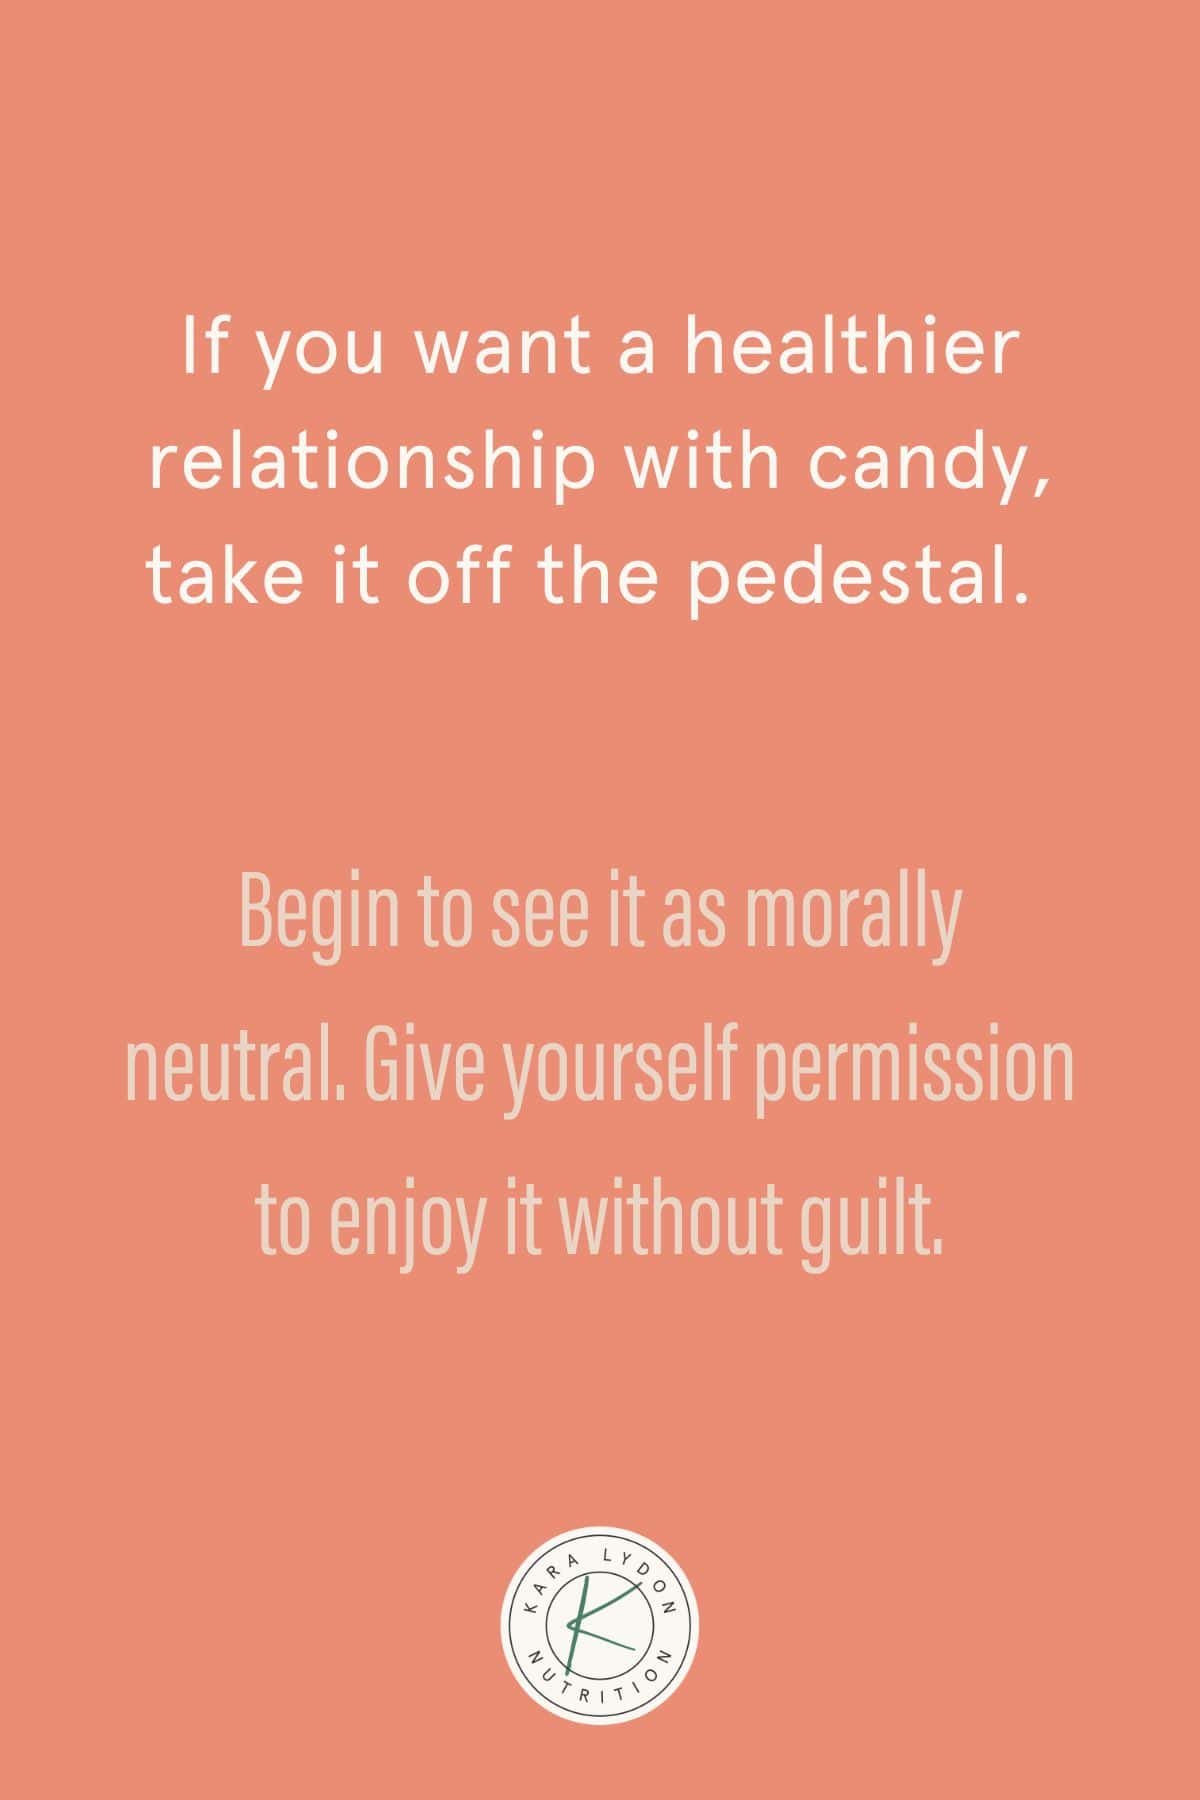 Graphic with quote: "If you want a healthier relationship with candy, take it off the pedestal. Begin to see it as morally neutral. Give yourself permission to enjoy it without guilt."